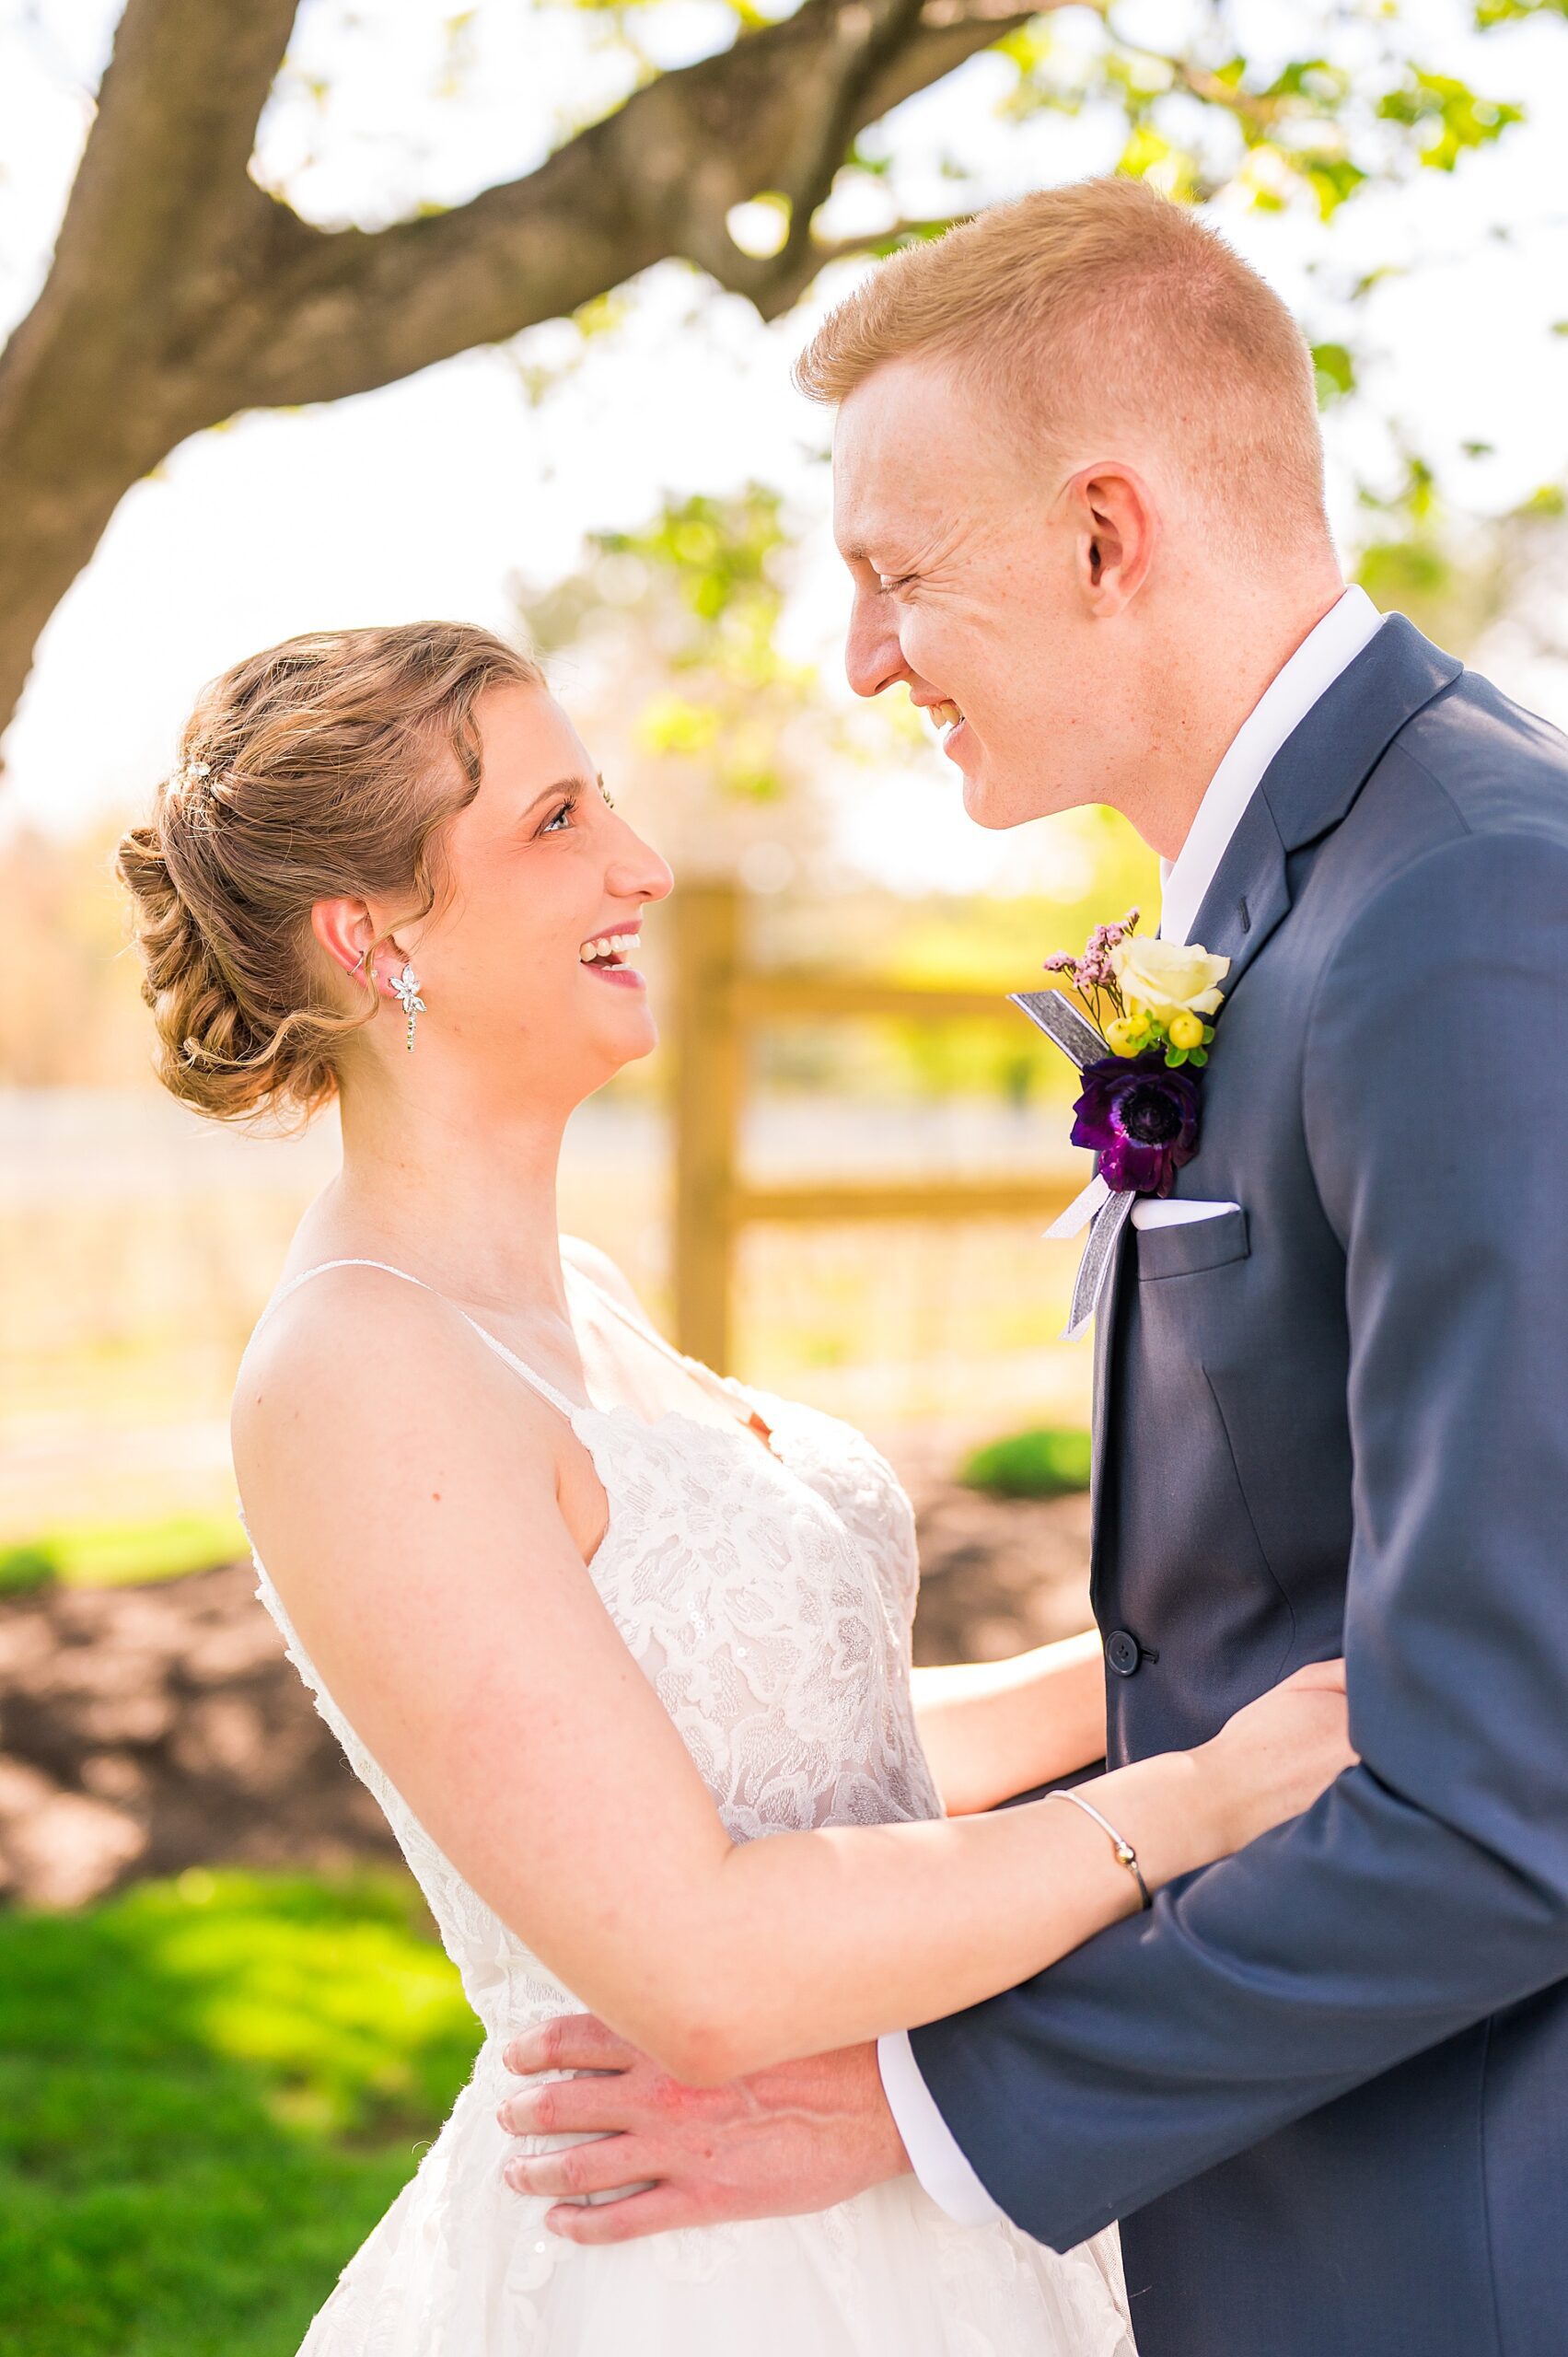 candid wedding portraits from couple's first look